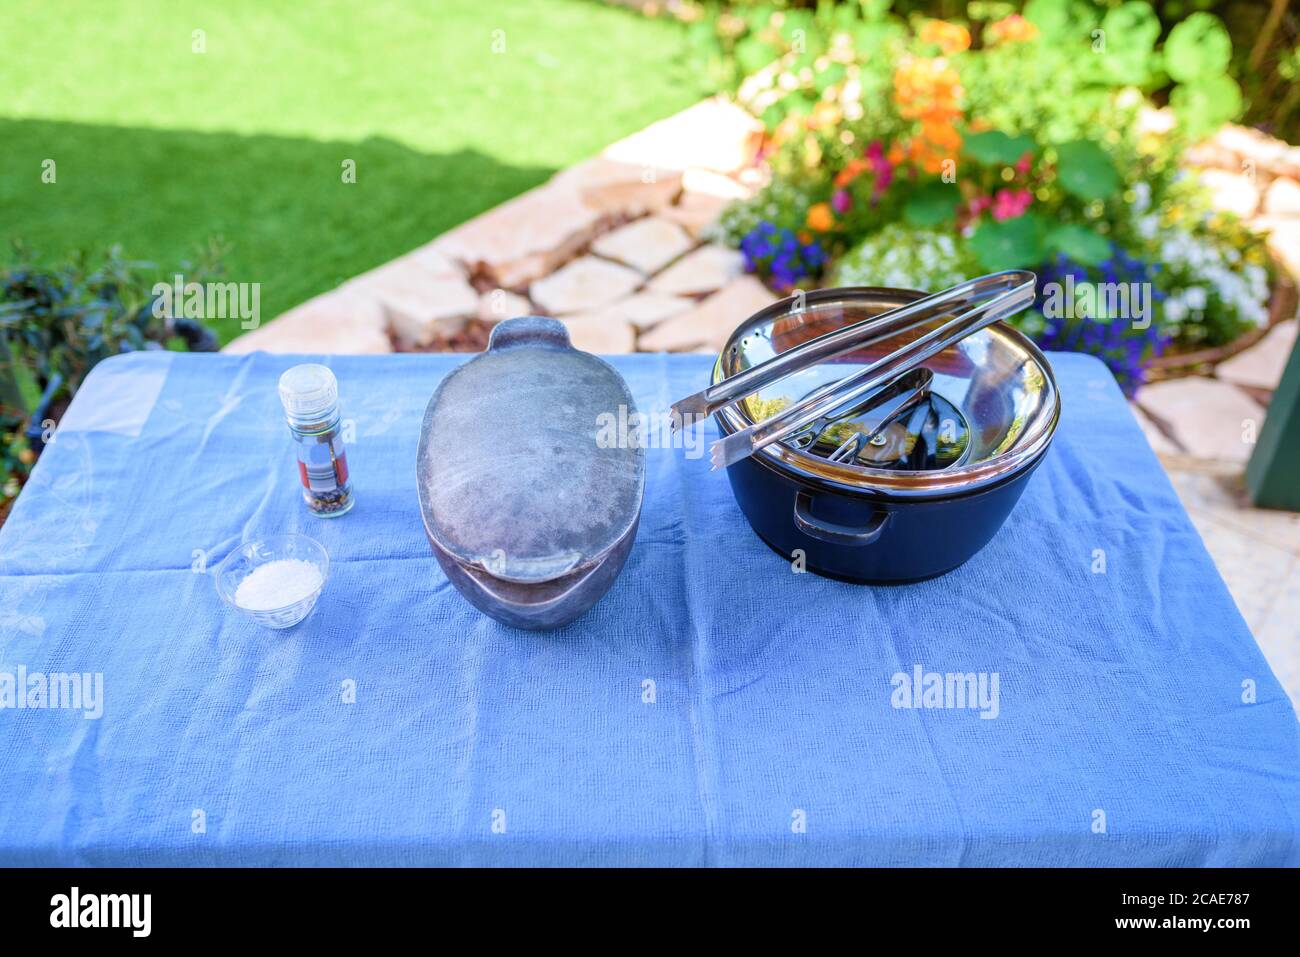 Preparing for a barbecue outside in the Summer Garden. Pots, bbq tongs, salt, spices on a table with a blue tablecloth.Retro style. Stock Photo